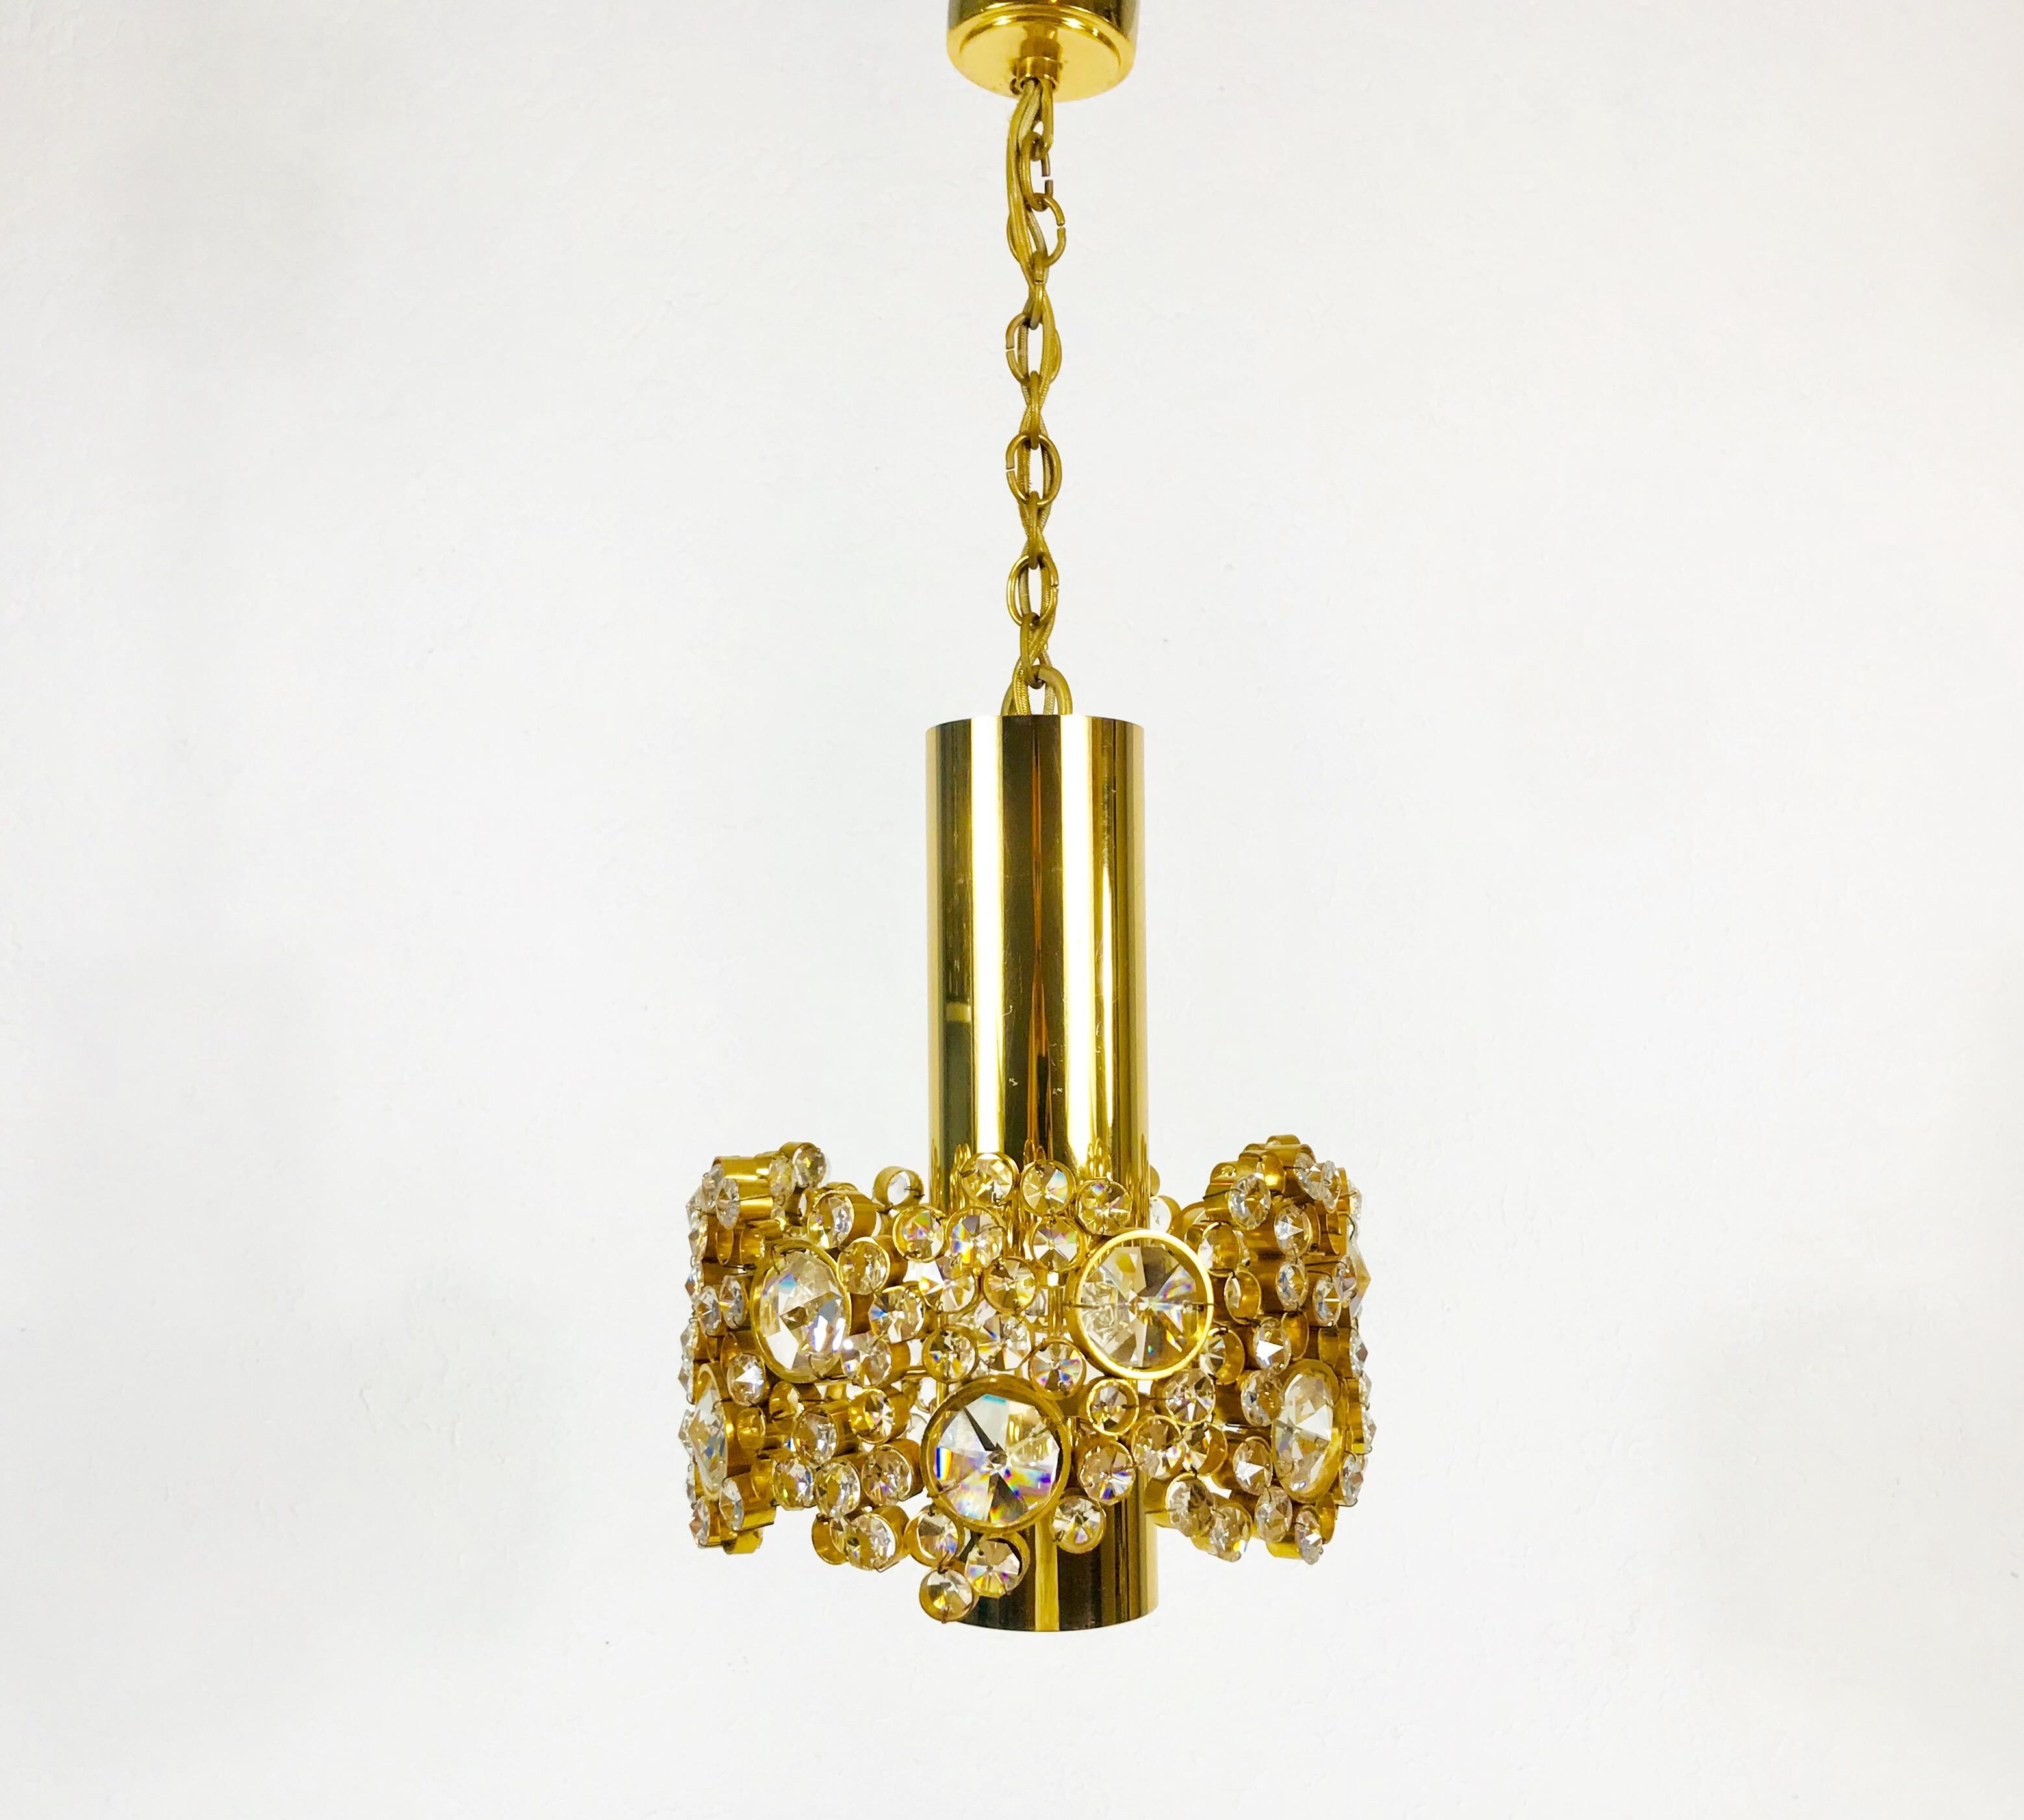 Hollywood Regency Gilt Brass and Crystal Glass Chandelier by Palwa, Germany, 1970s For Sale